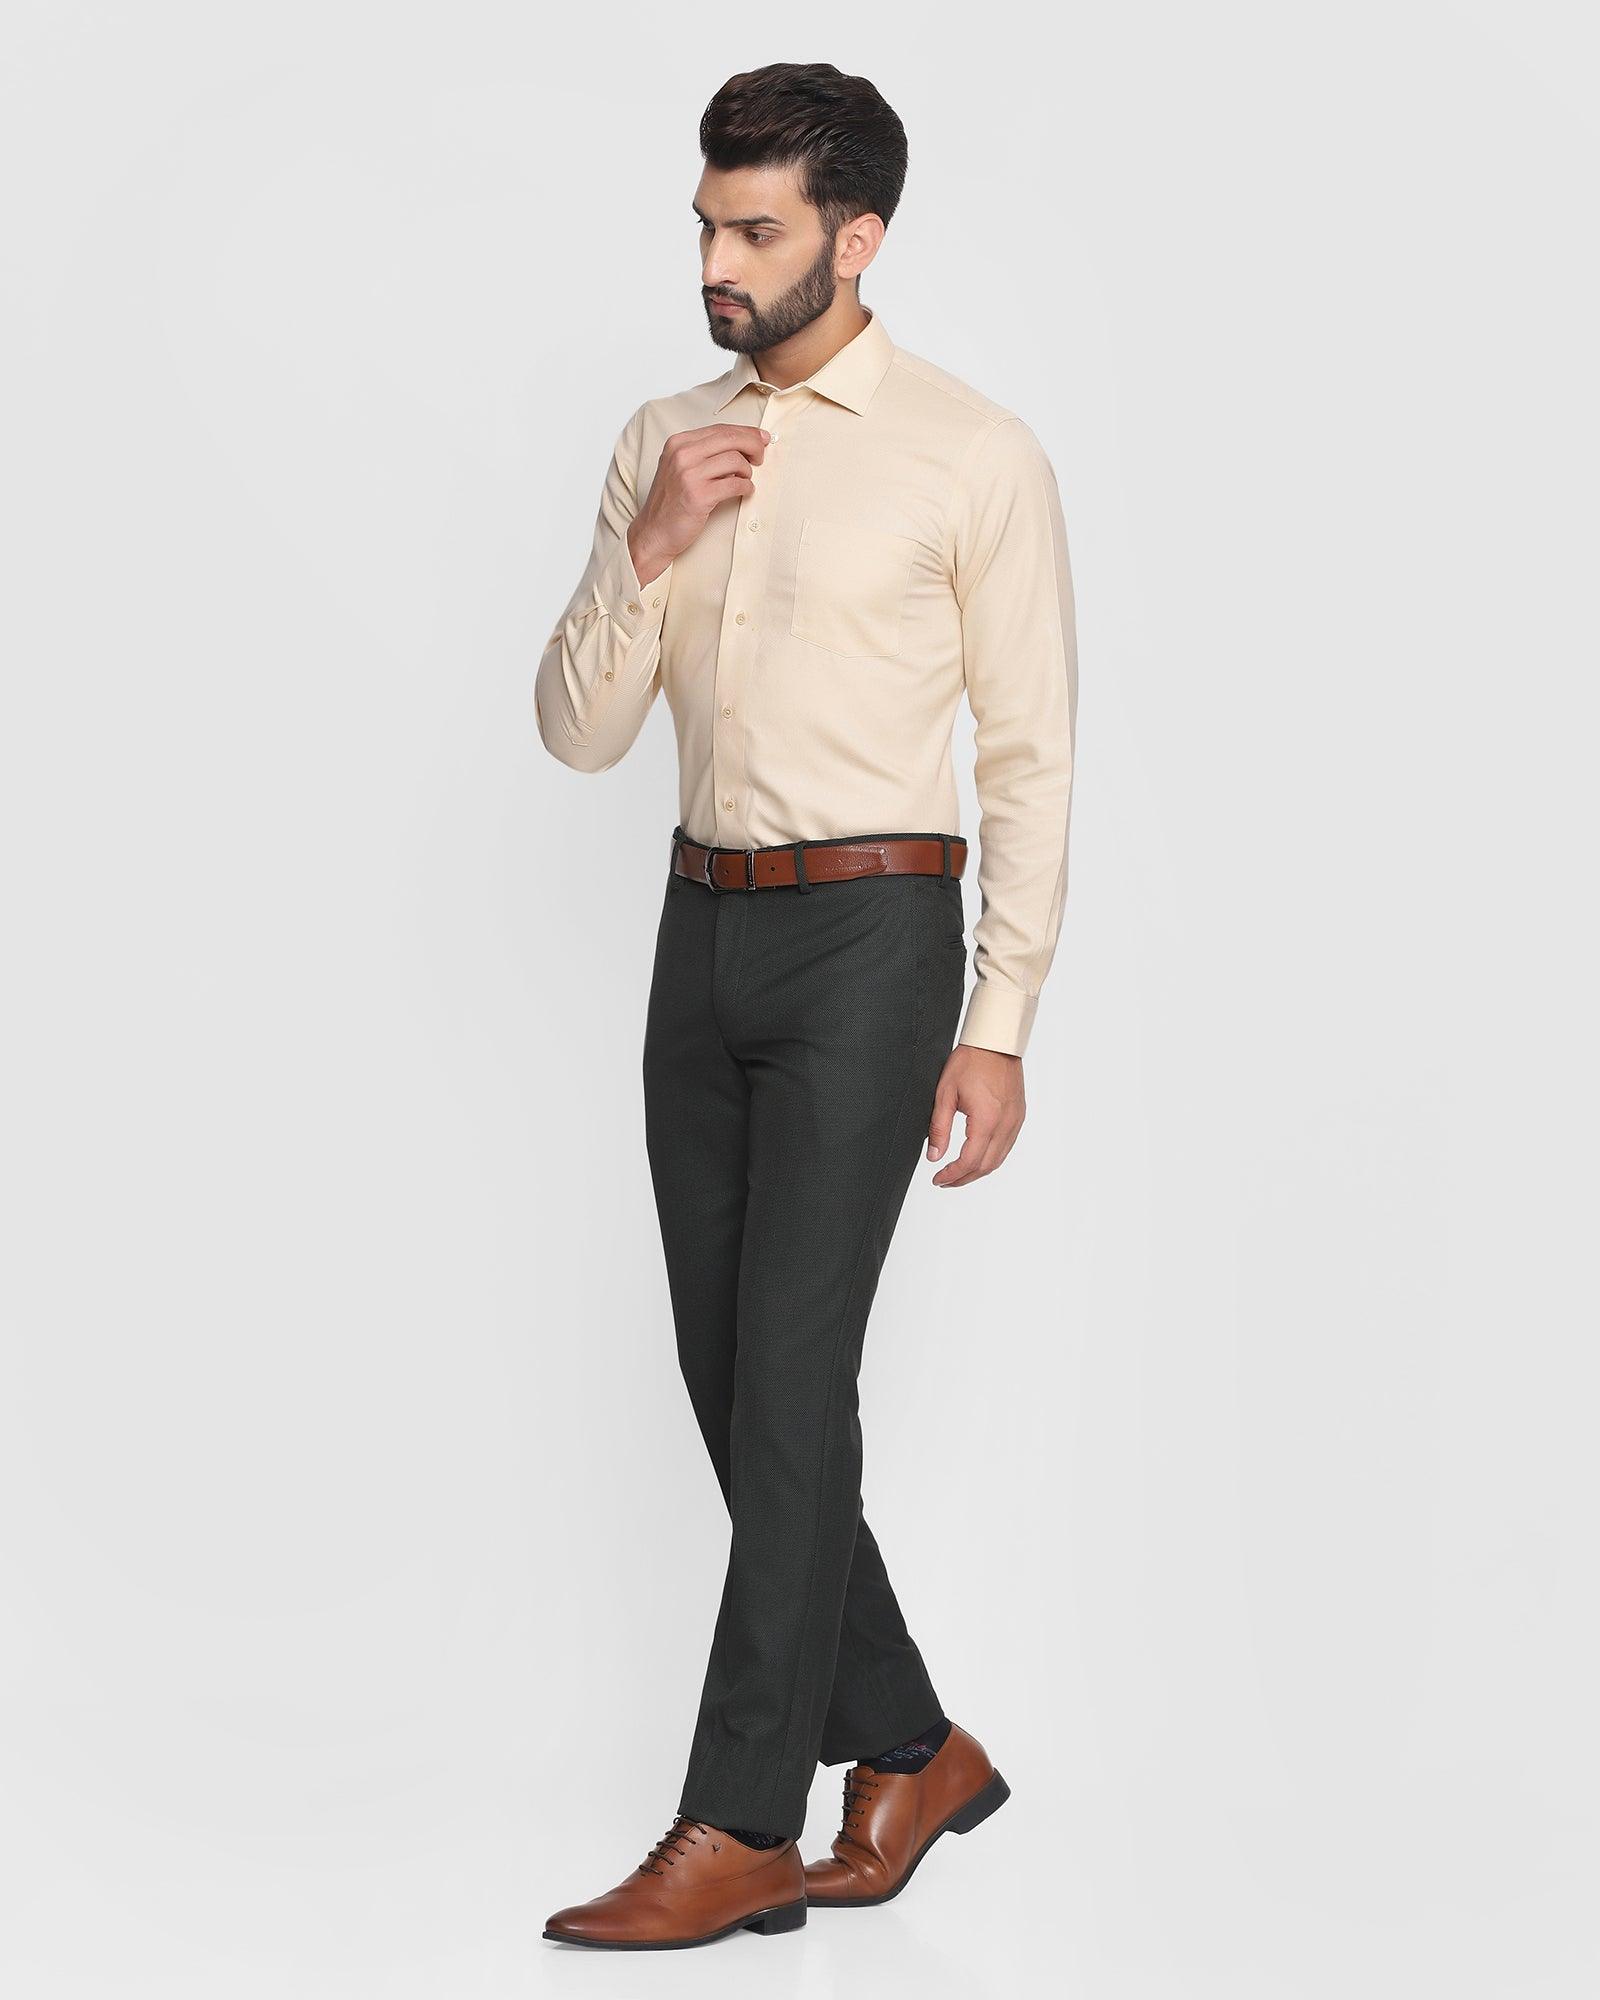 textured formal trousers in olive b 95 cairo blackberrys clothing 3